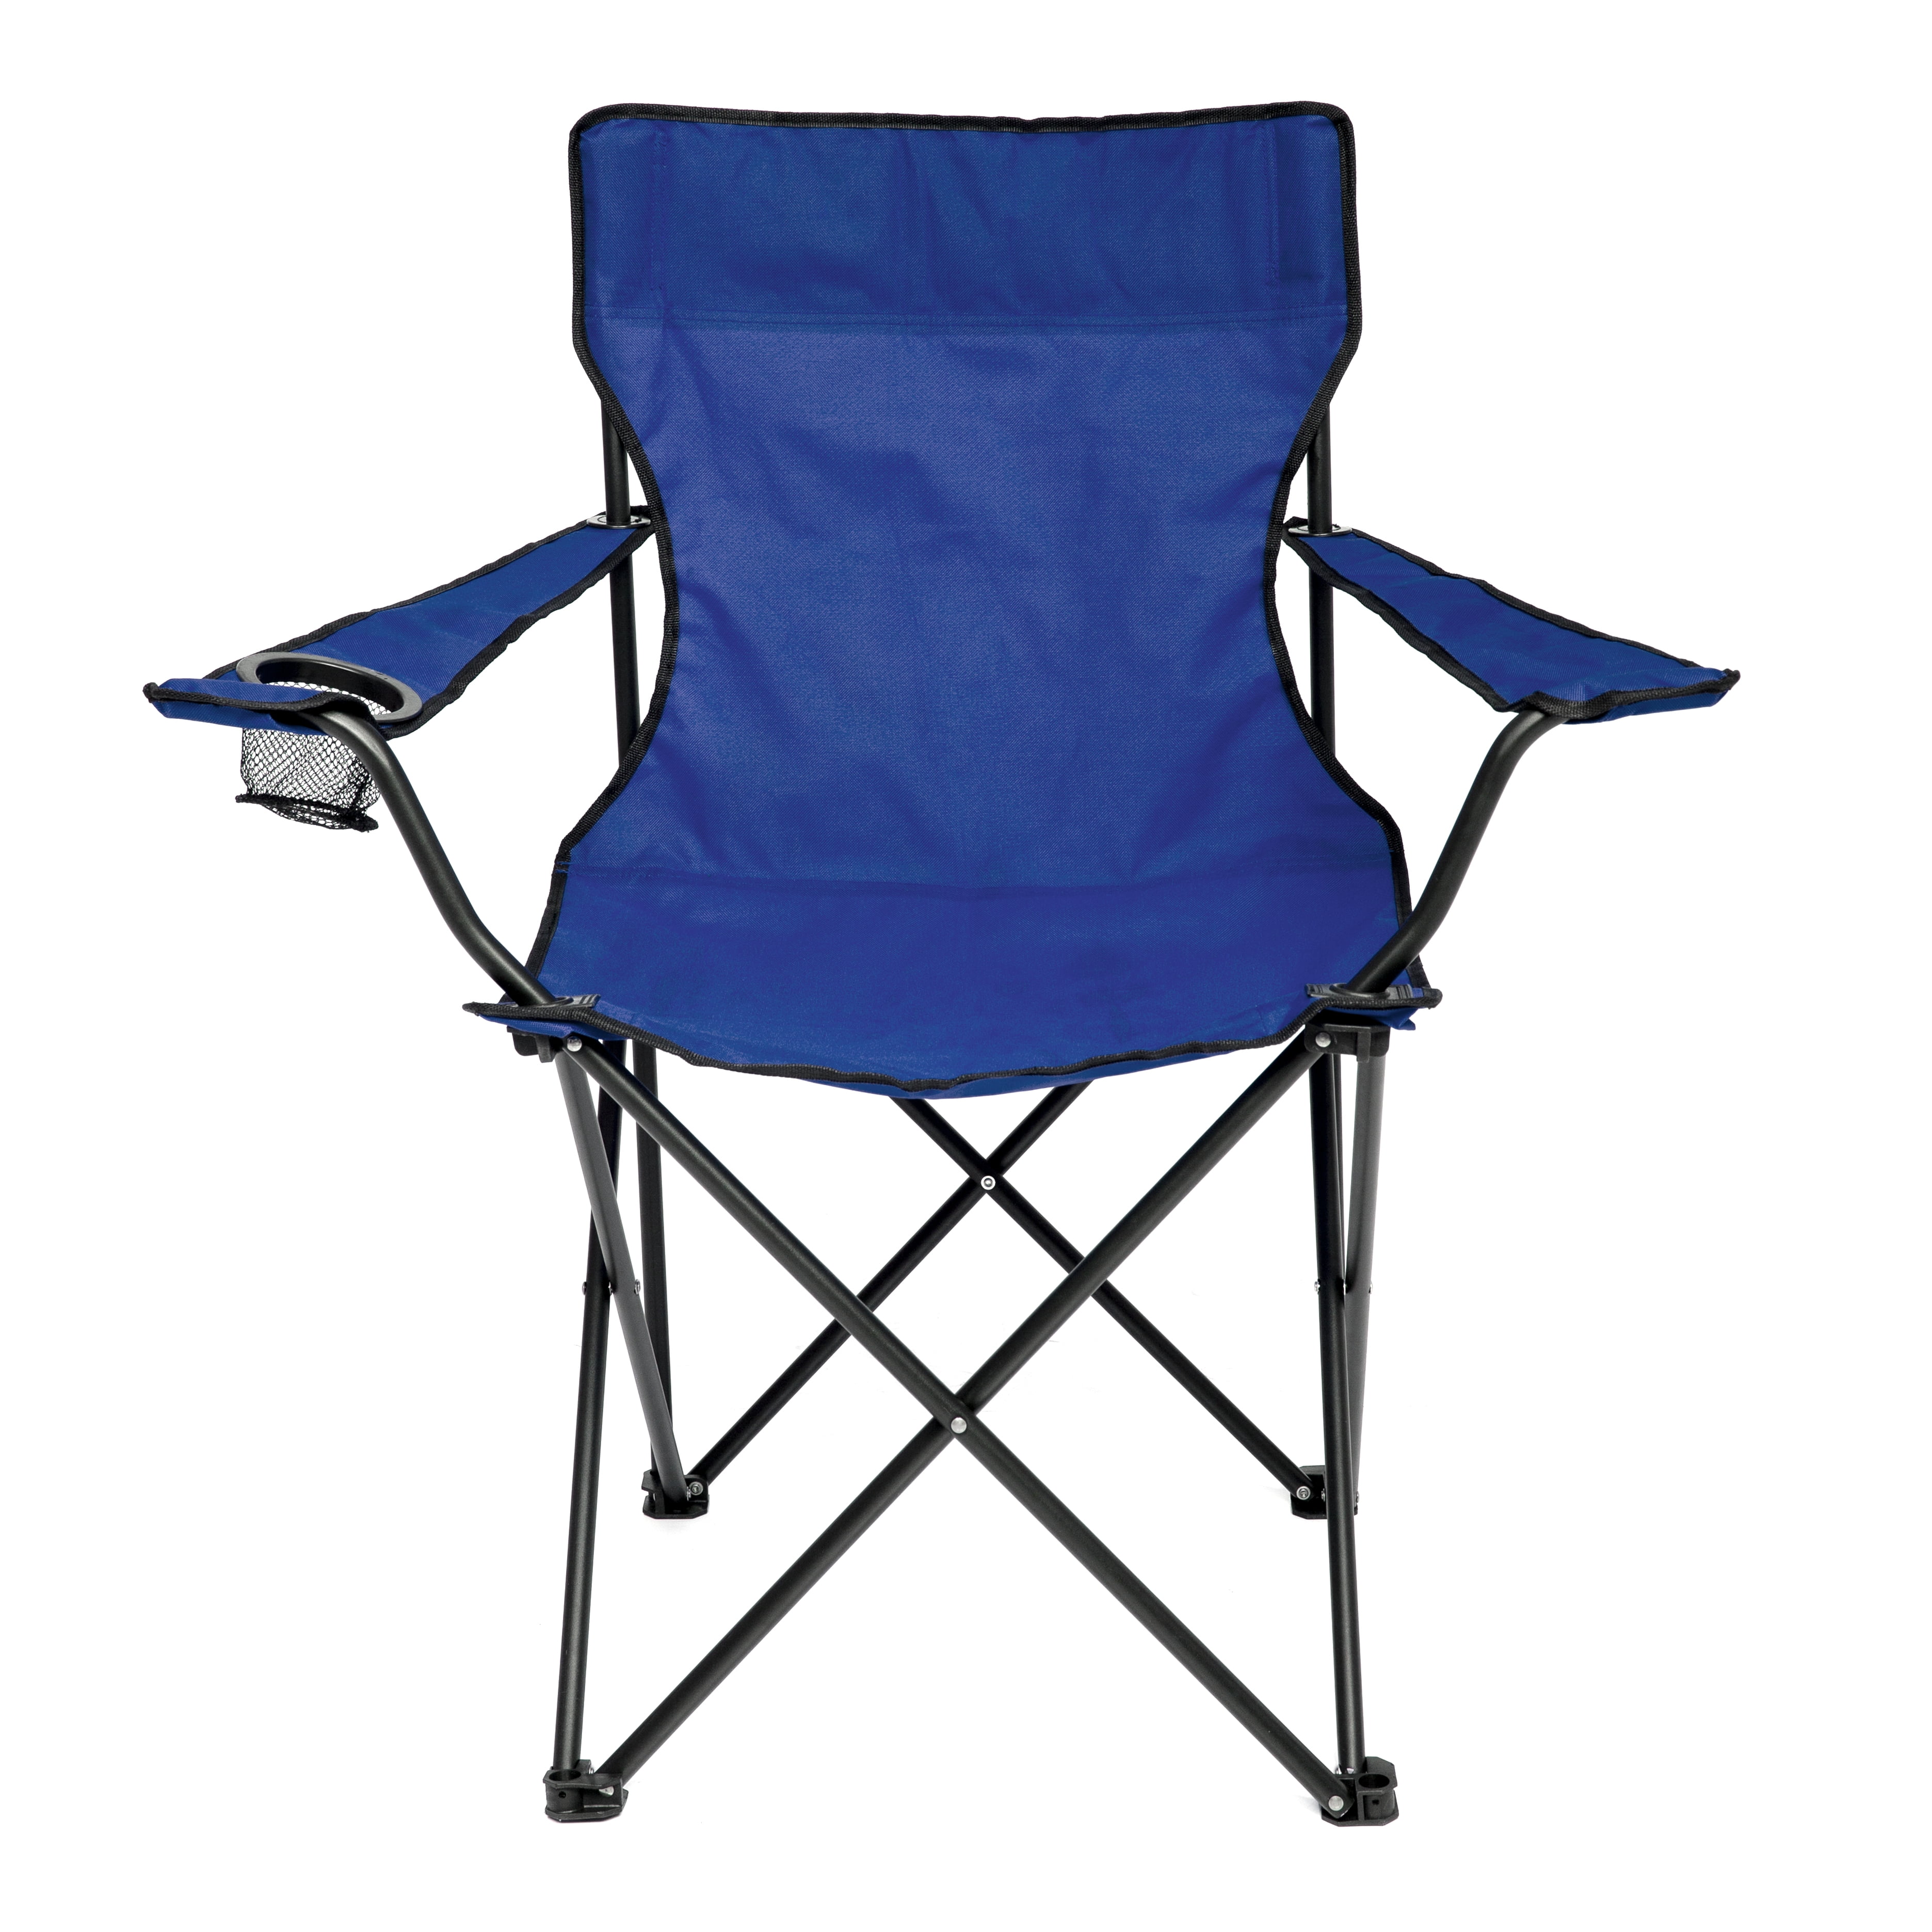 Portable Folding Chair Camping Picnic Outdoor Garden Rocking Chair Stools 